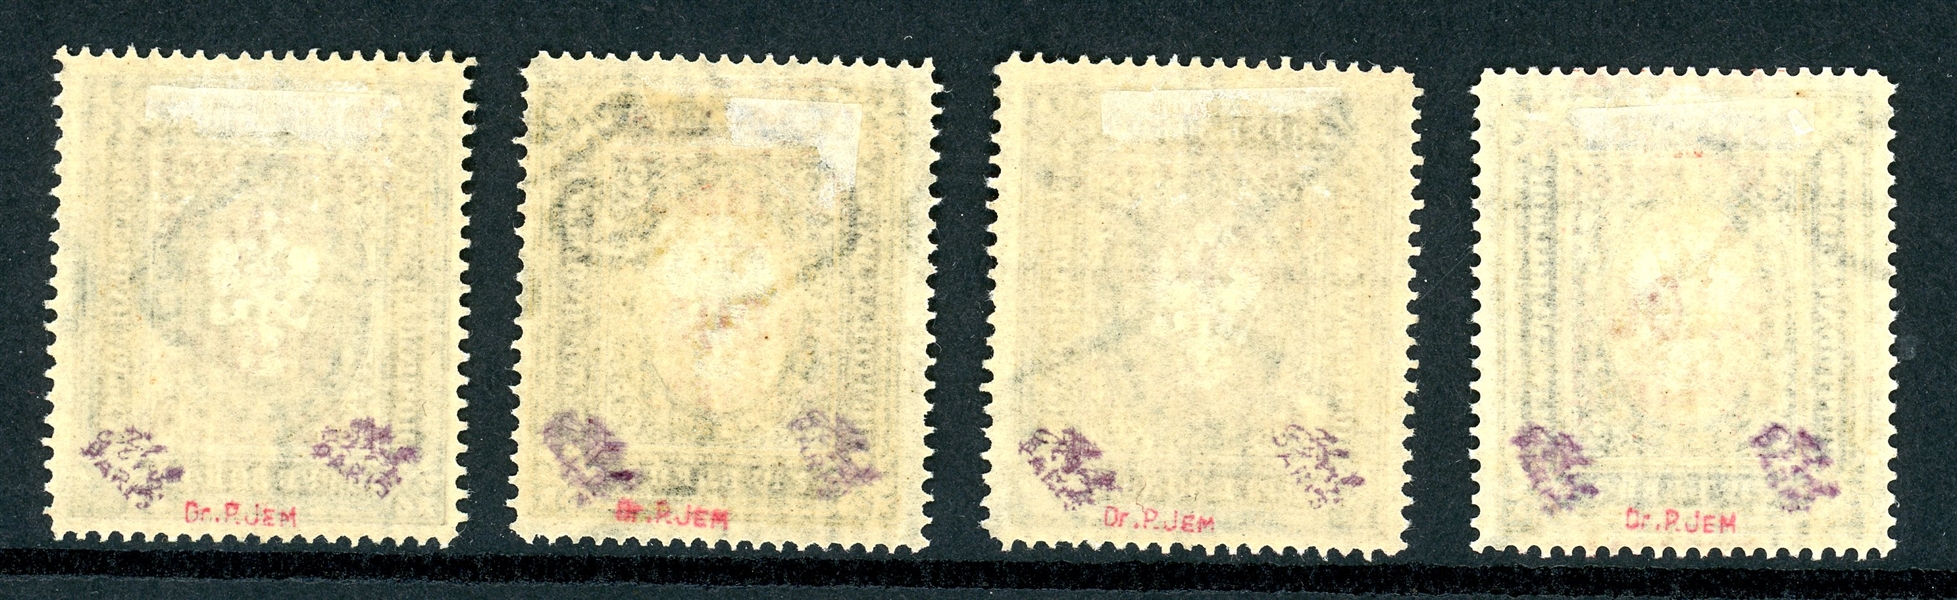 Russia Offices in Turkey Rare 1921 Wrangel Issue Scott 232-5 MH Complete Set, Signed (SCV $1000) 